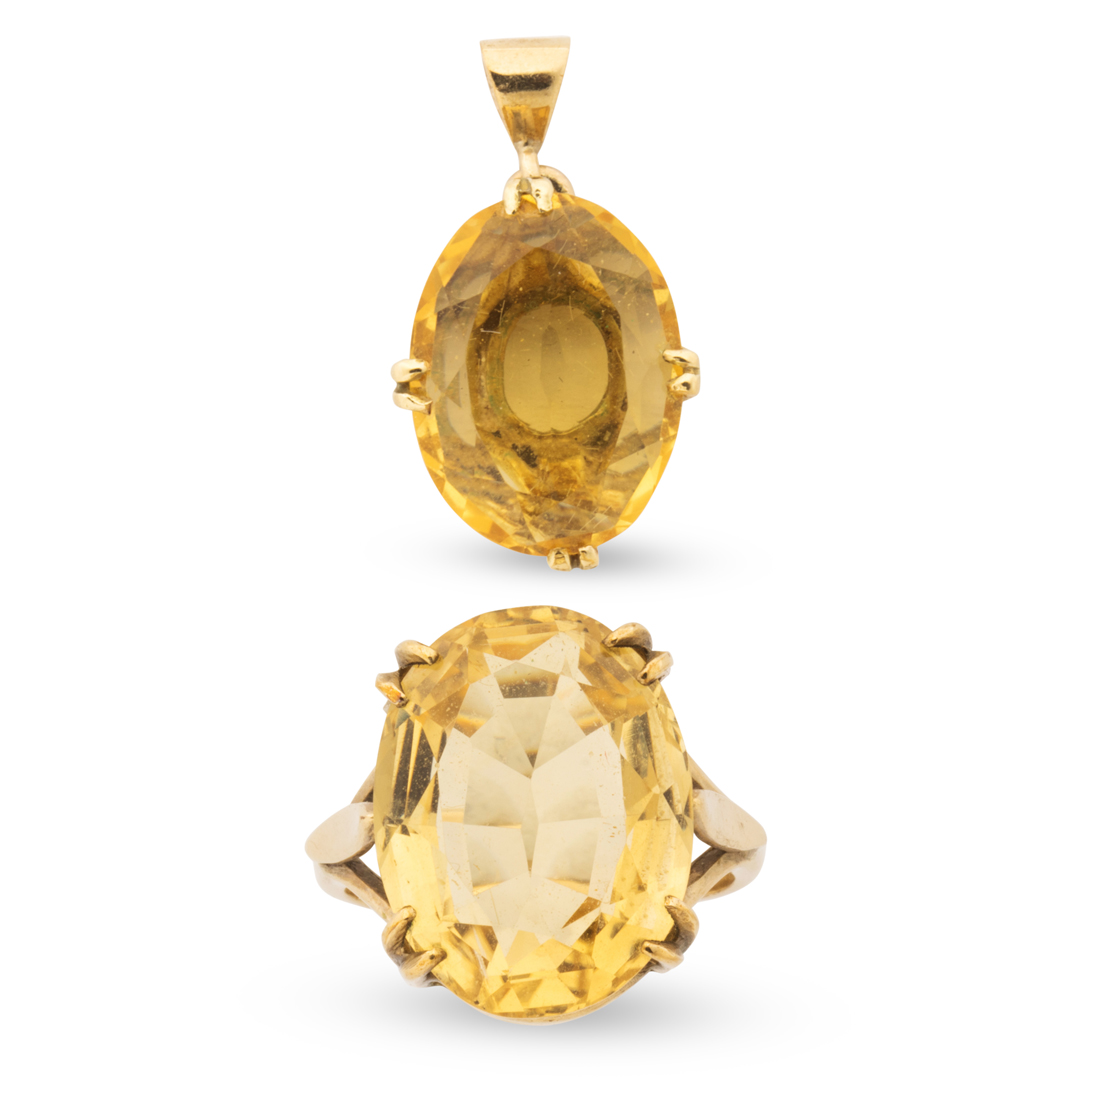 A GROUP OF CITRINE JEWELRY A group 3a1fa1